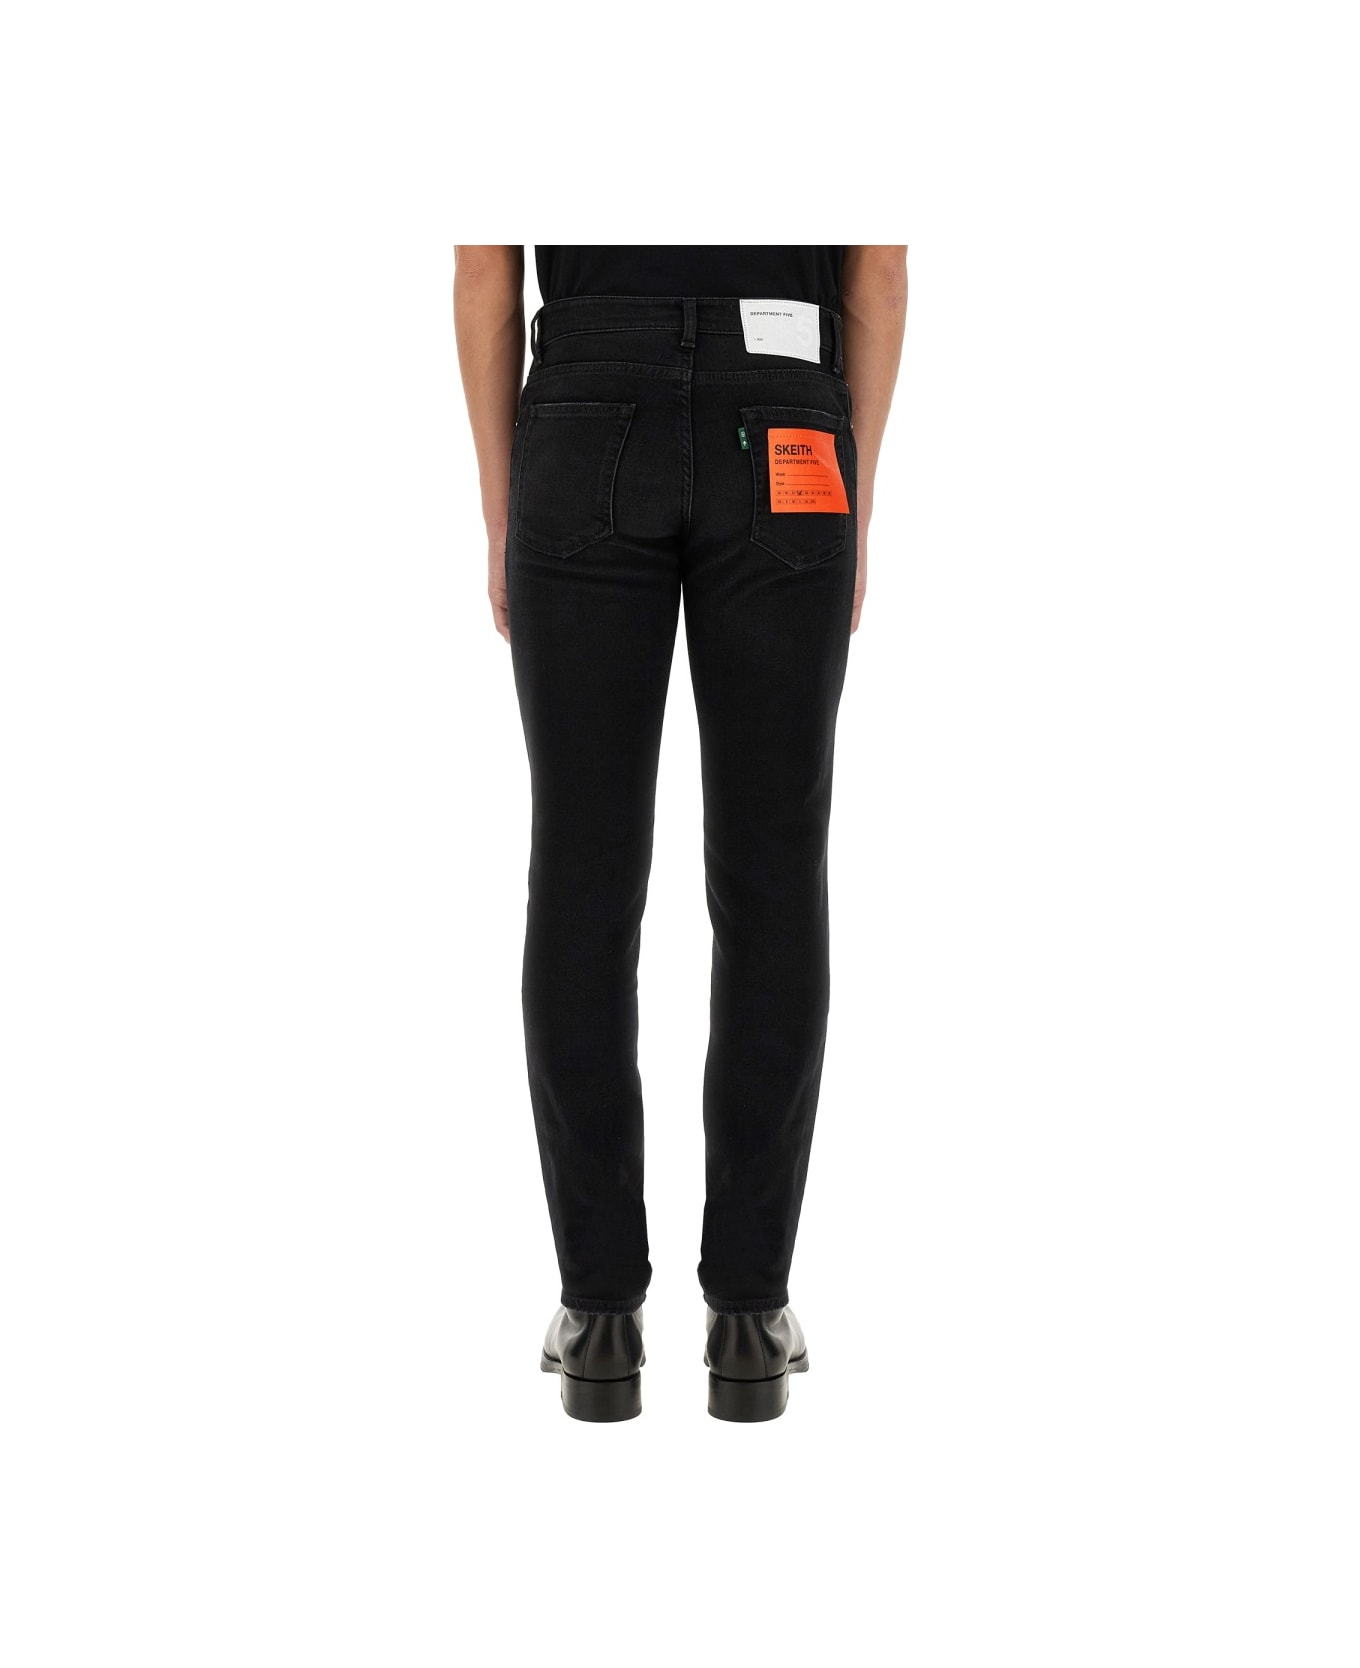 Department Five Jeans Skeith - BLACK